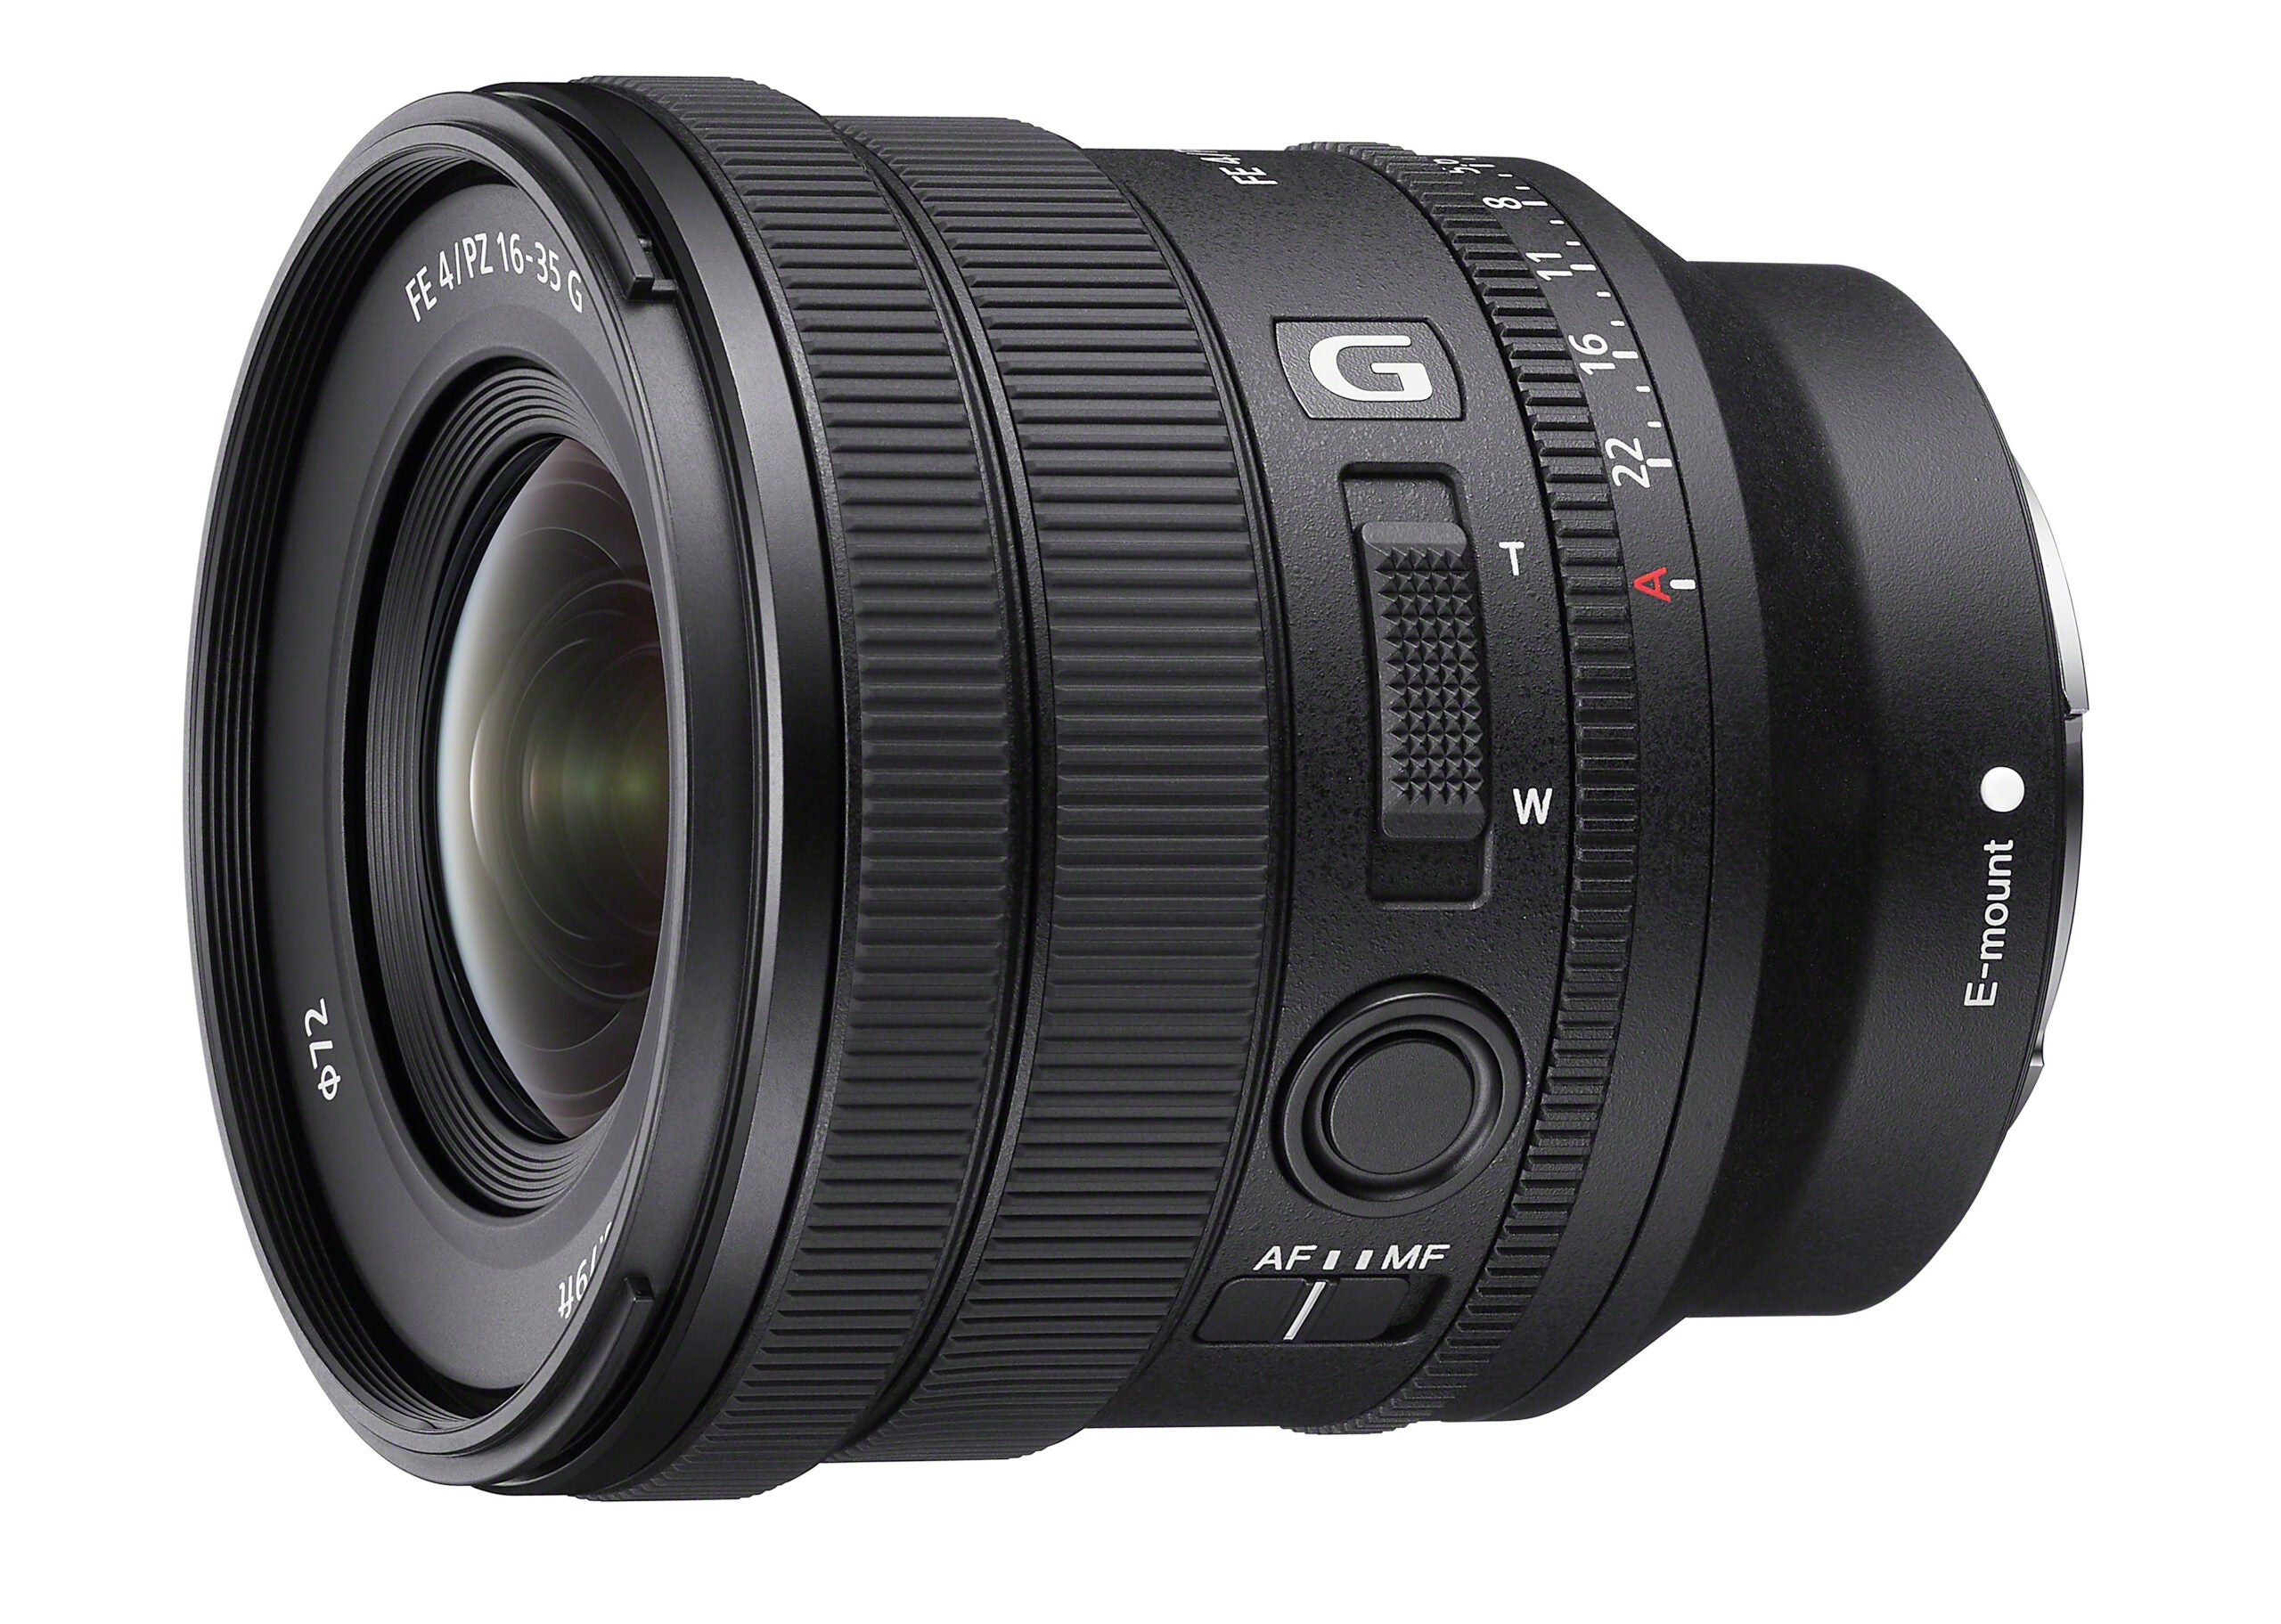 The new Sony FE PZ 16-35mm f/4 G zoom lens.